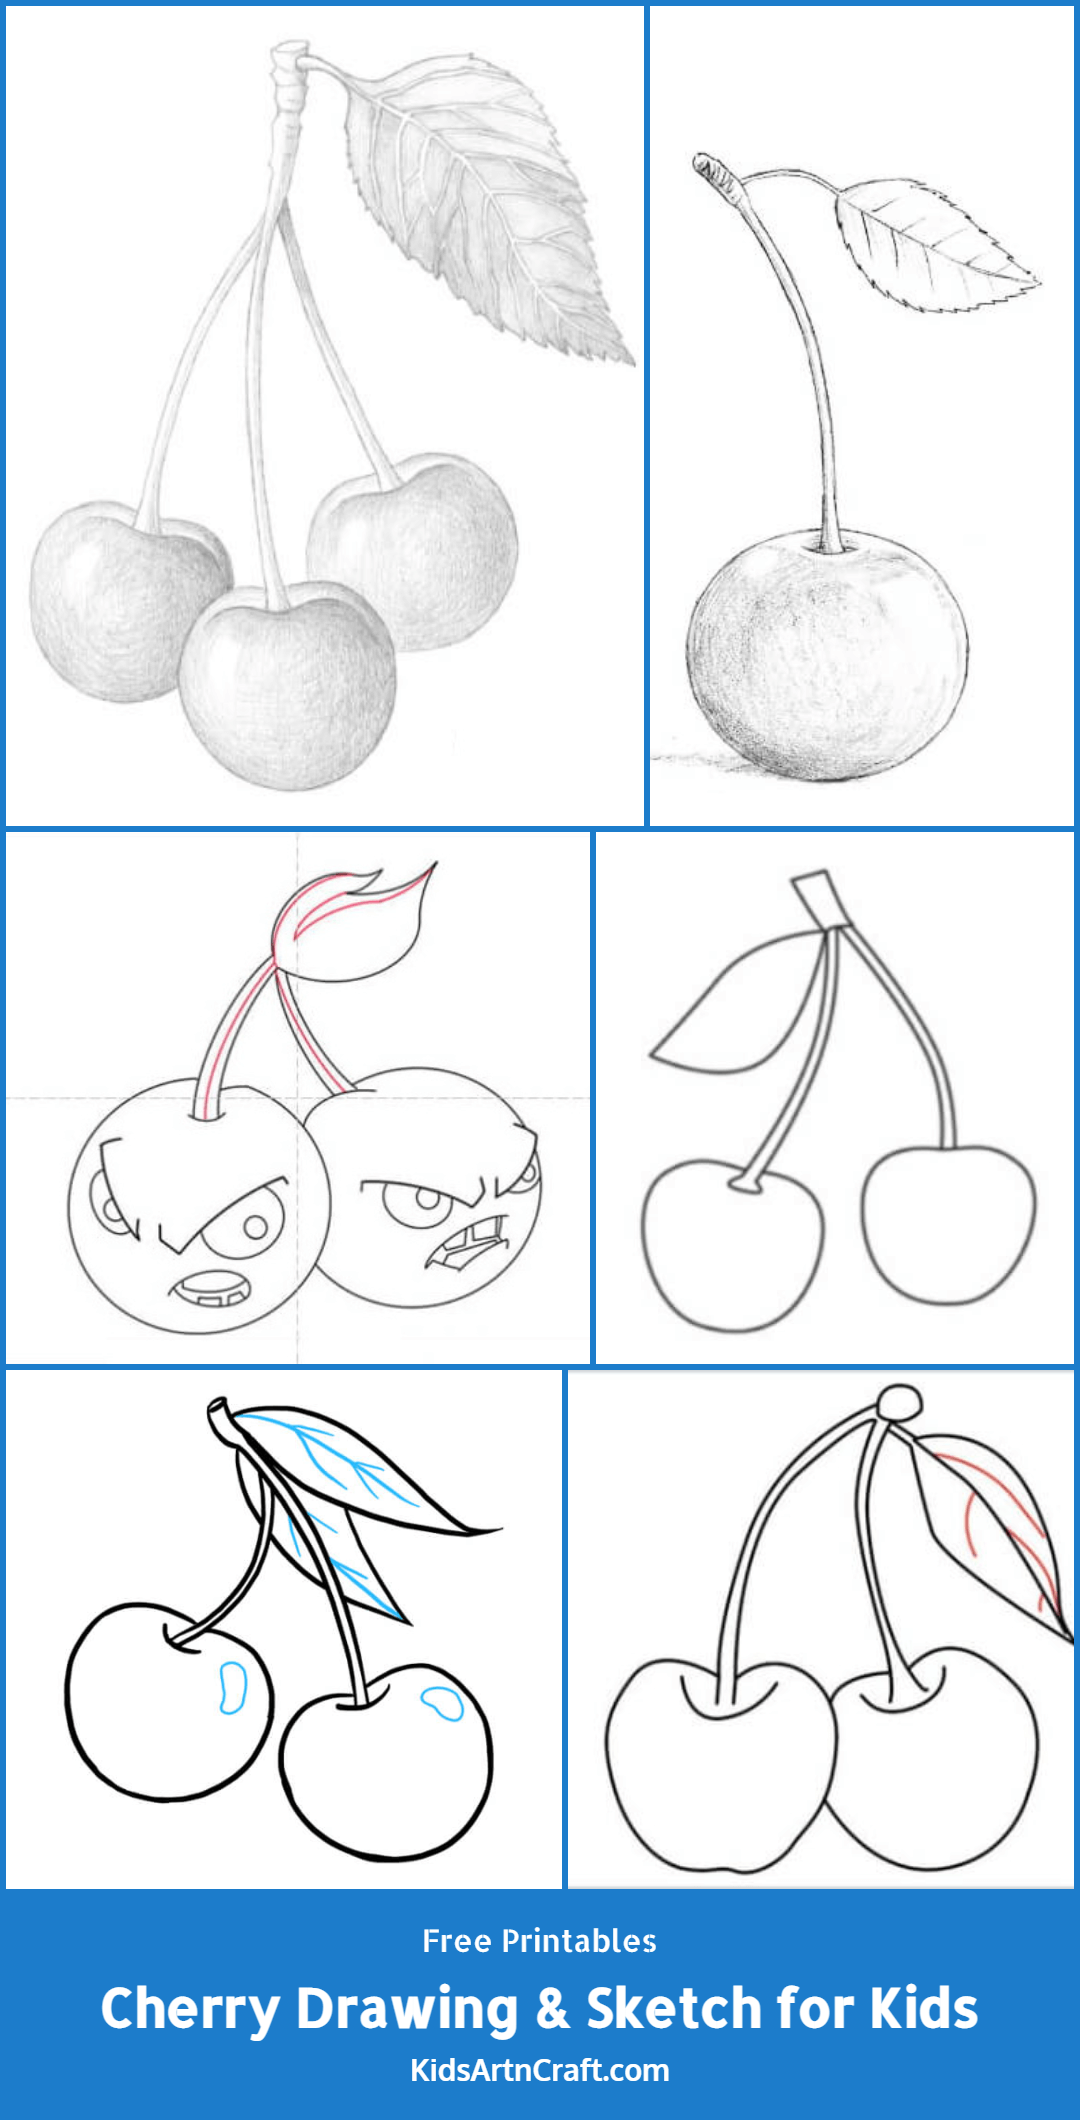 Cherry Drawing & Sketch for Kids